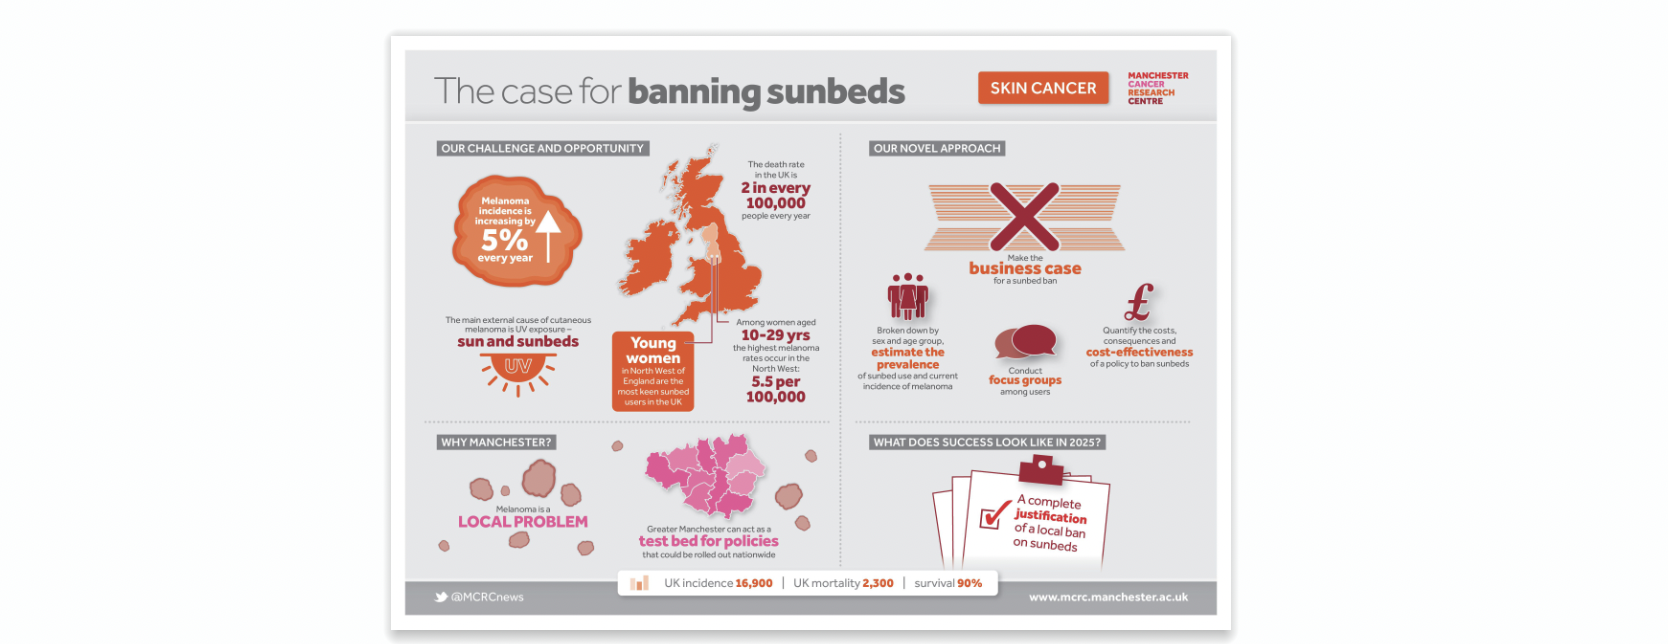 Manchester Cancer Research Centre | The Case for Banning Sunbeds